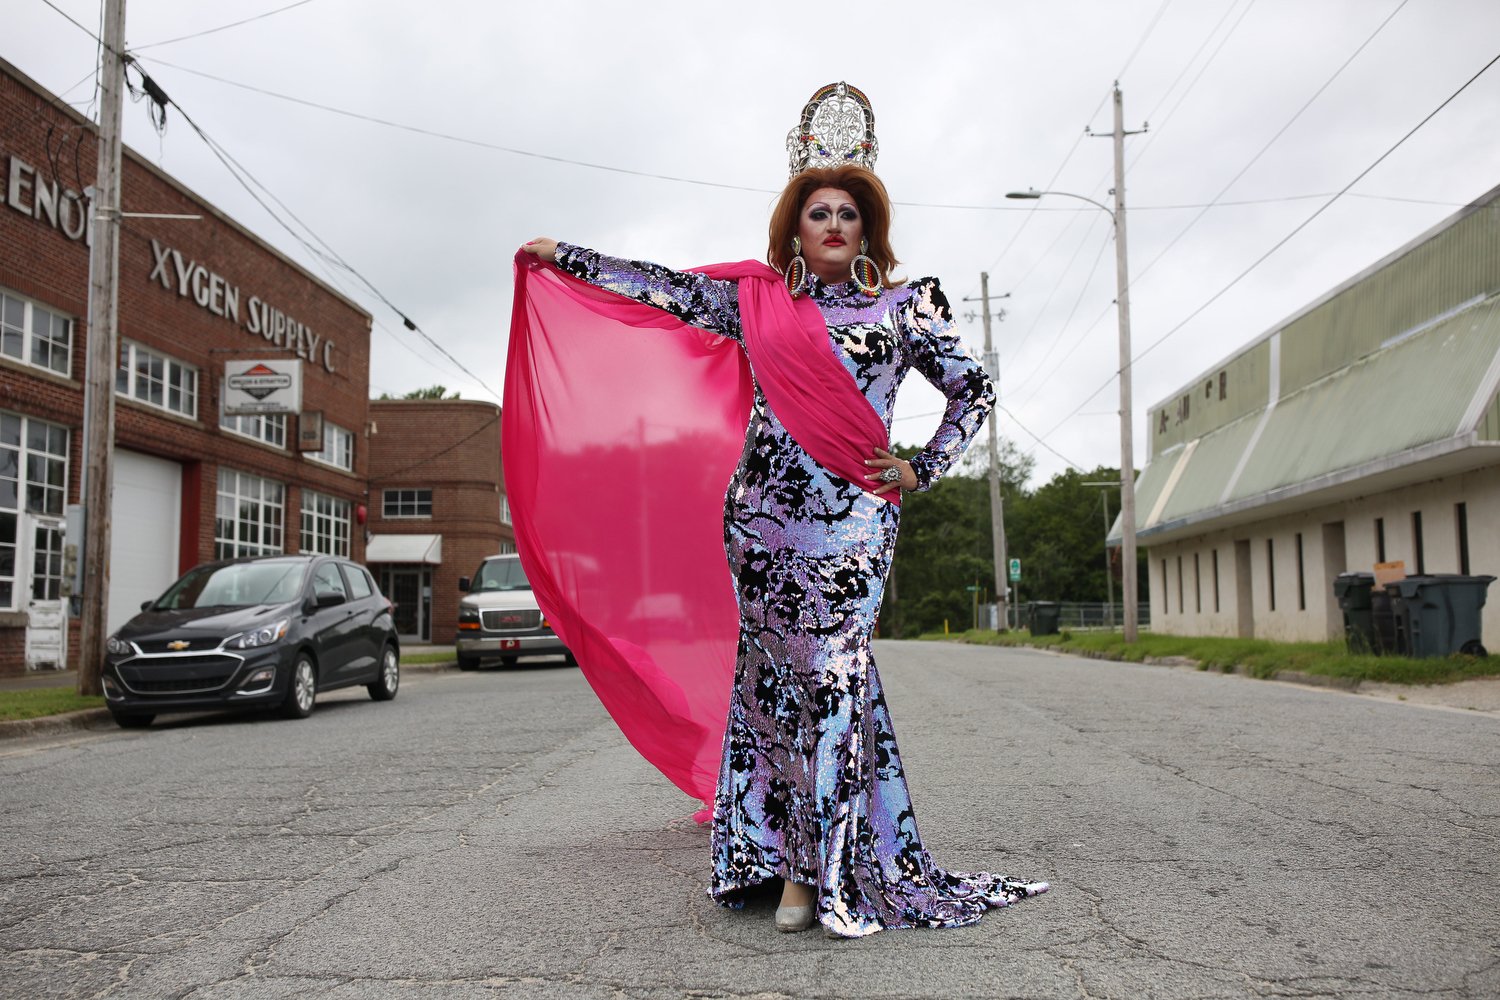  After 25 years Michaels says she has drag great grandkids referencing all of the performers she has mentored over the years. She sees her role as paving the way to make drag "easier and more fulfilling as those before me did. As a momma to Eastern N